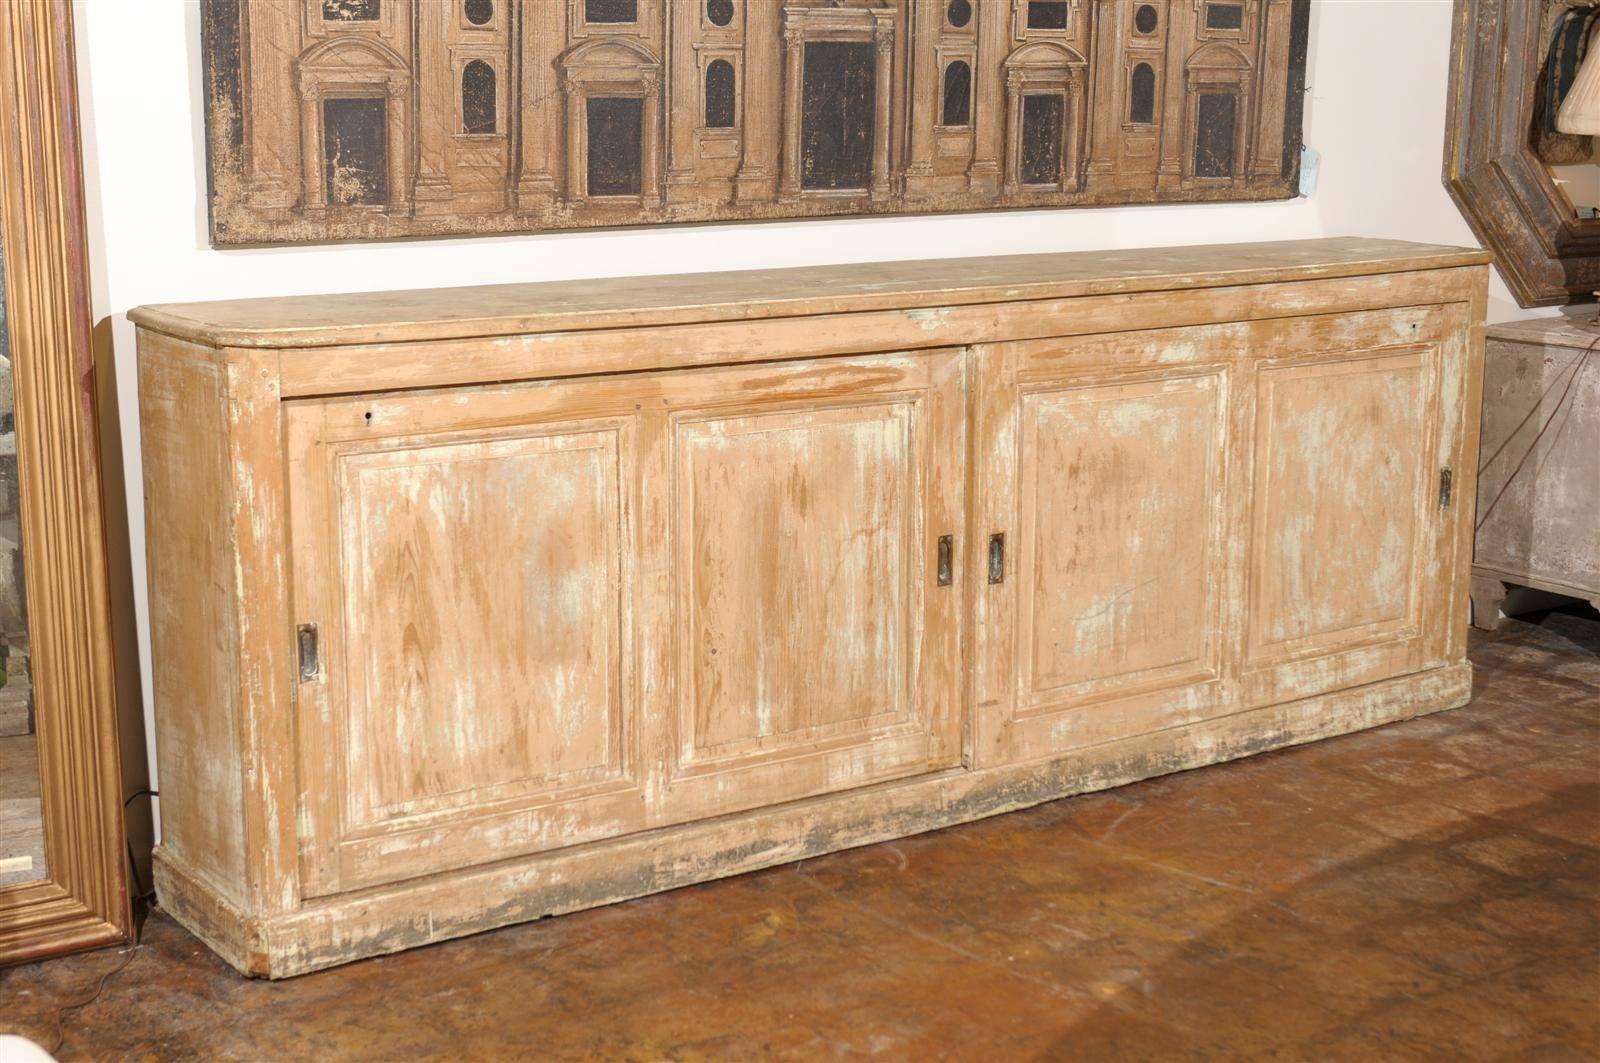 This Italian extra long wooden shop counter from Tuscany was born in the 19th century. It features a long and narrow rectangular top with rounded edges and canted corners as well as side posts. Sitting below are two sliding doors divided with two